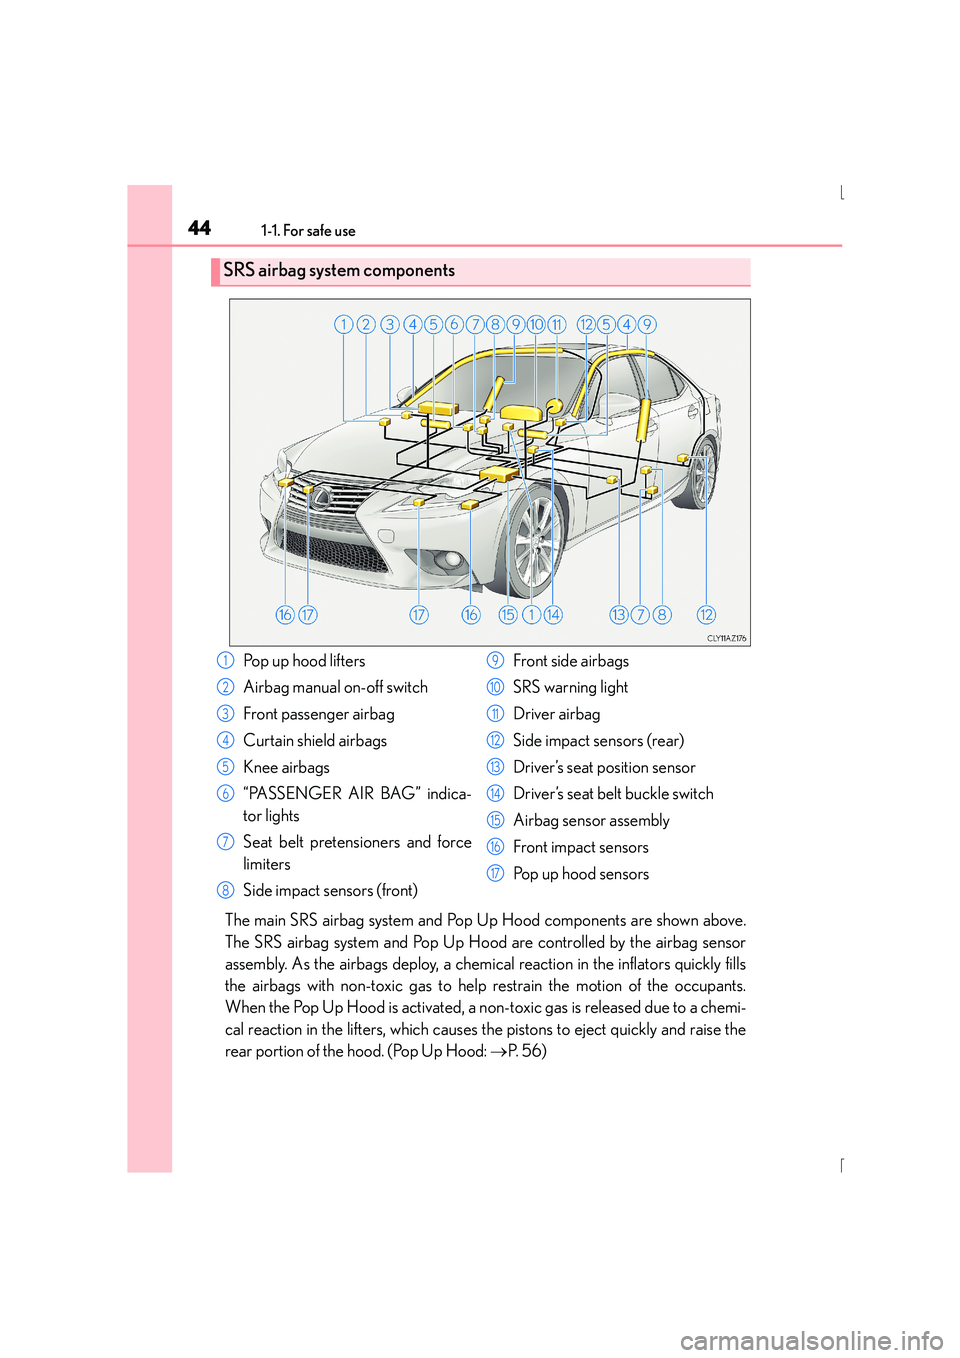 Lexus IS300h 2016 Service Manual 441-1. For safe use
IS300h_EE(OM53D56E)
The main SRS airbag system and Pop Up Hood components are shown above.
The SRS airbag system and Pop Up Hood are controlled by the airbag sensor
assembly. As th